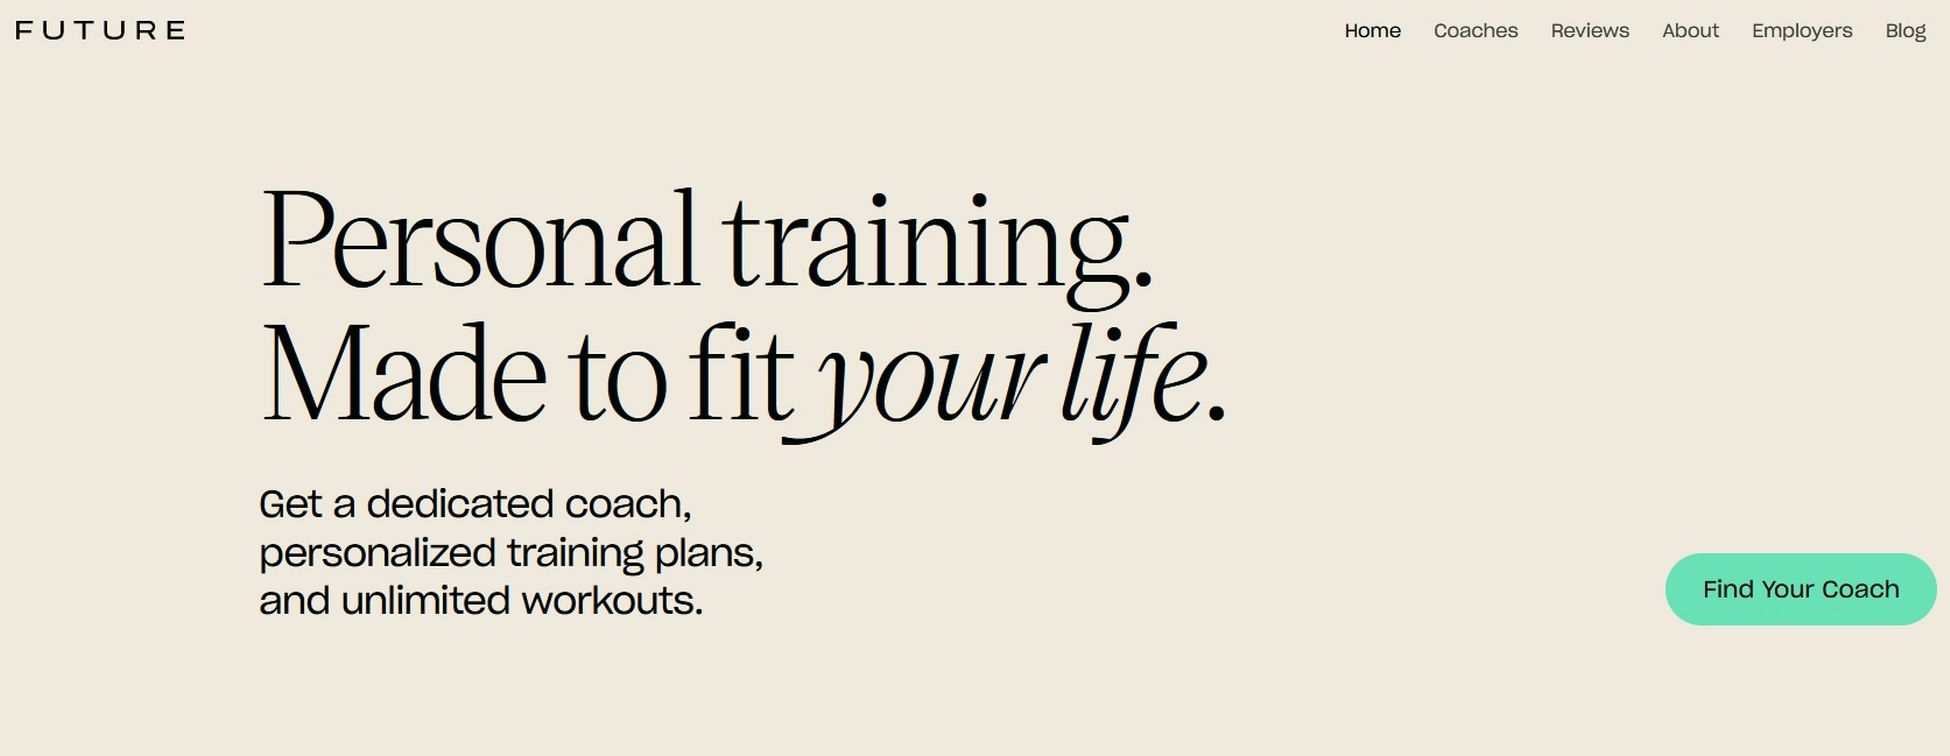 Future online fitness training and coaching 